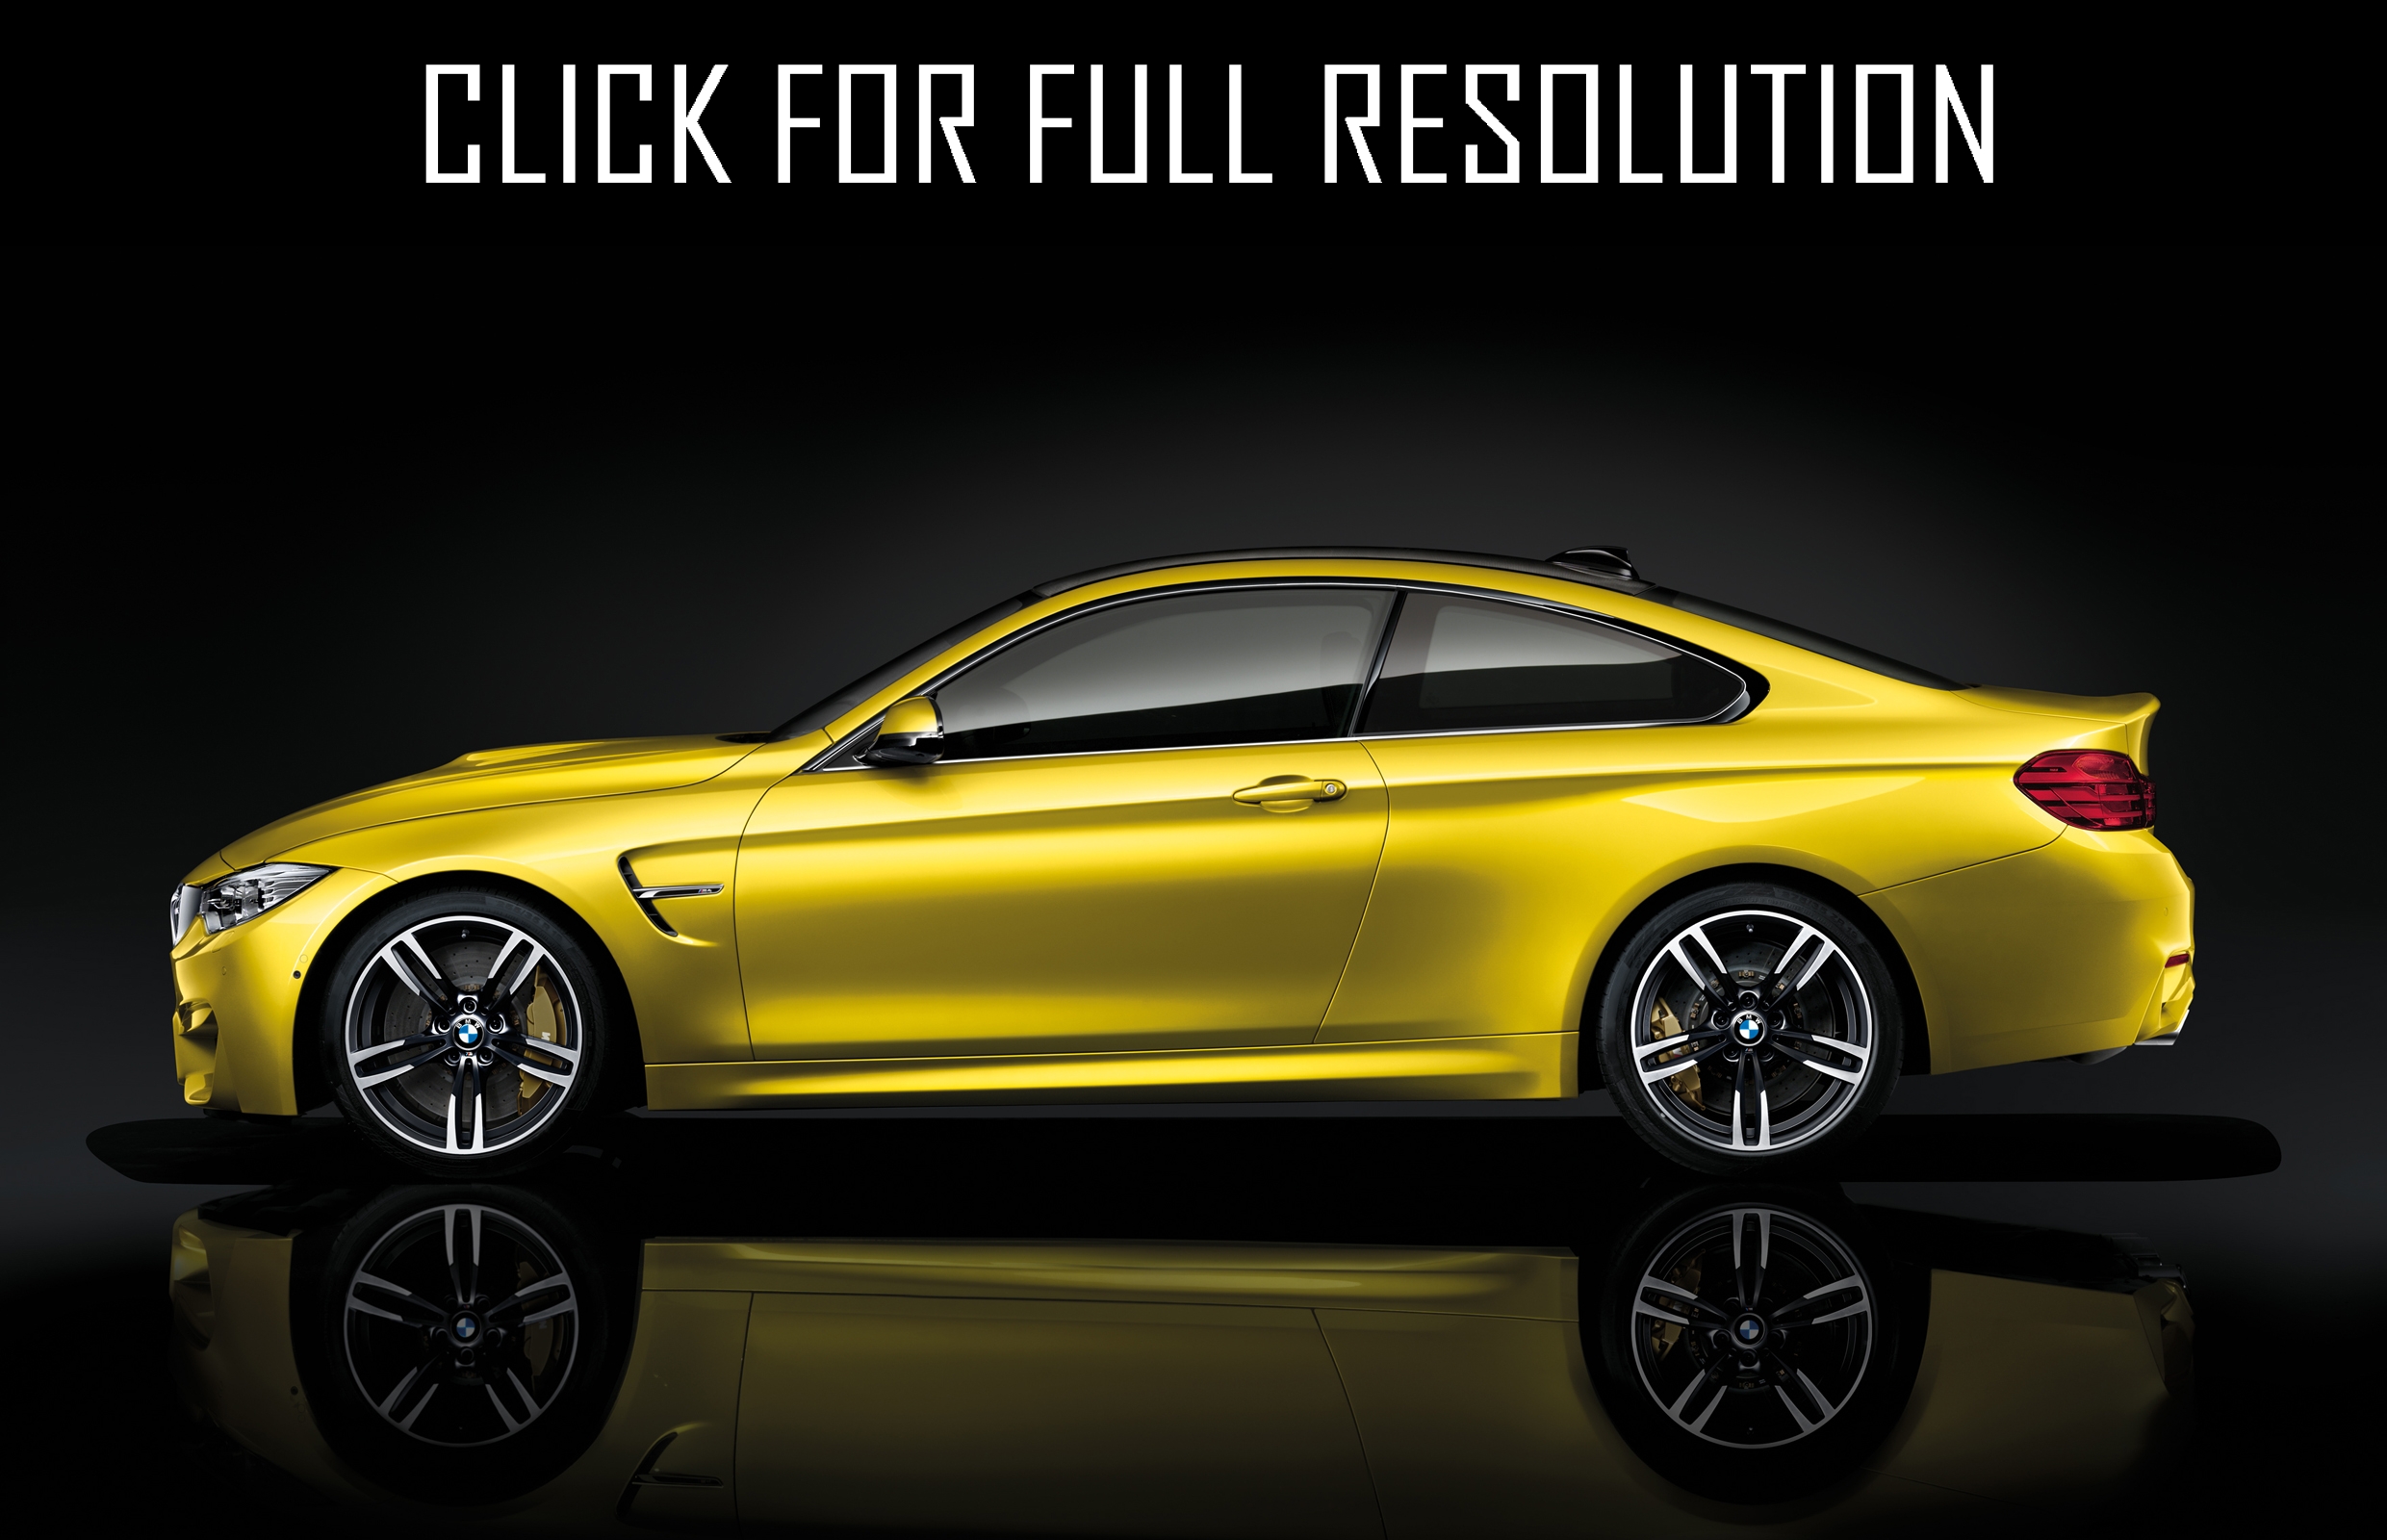 2015 Bmw M4 Coupe